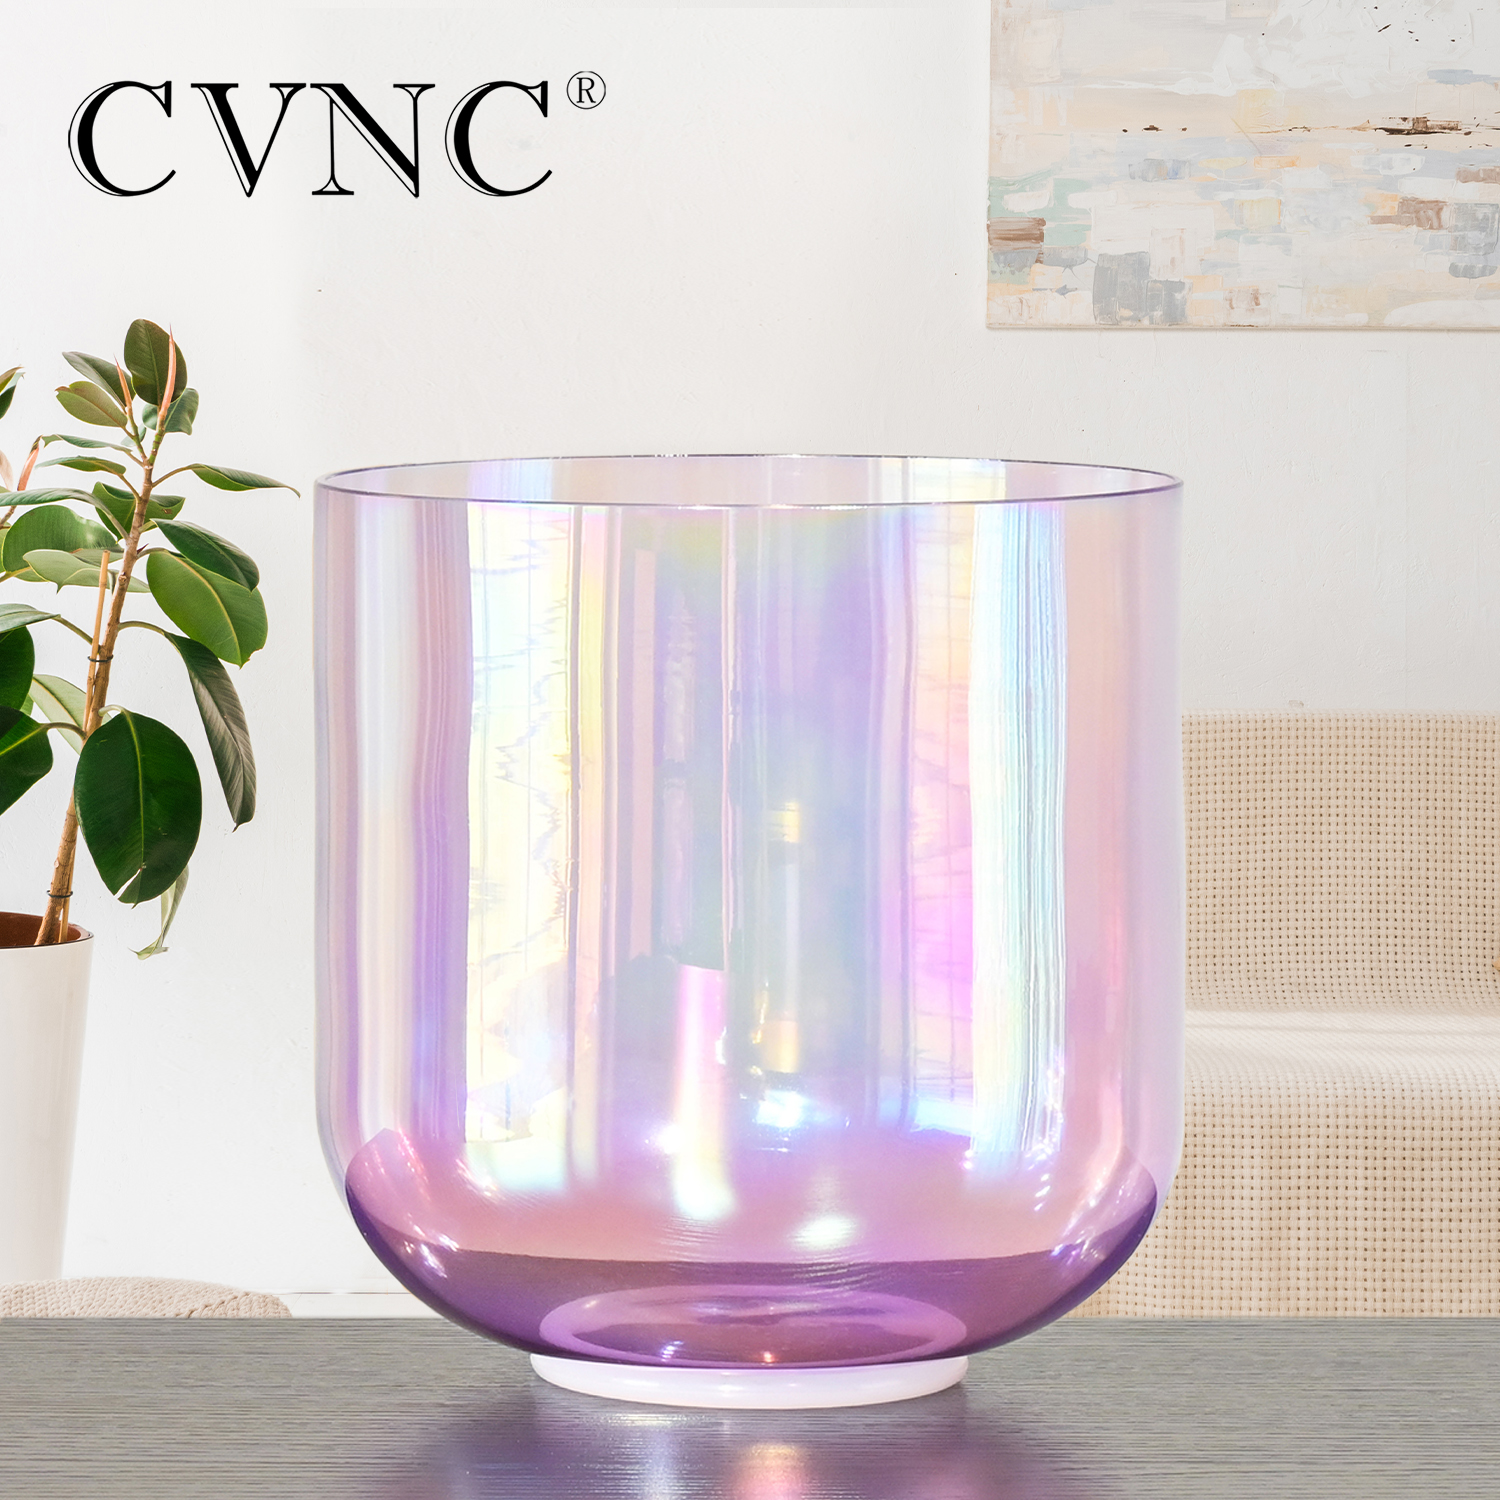 CVNC 7 Inch Alchemy Clear Quartz Crystal Singing Bowl Purple with Cosmic Light for Sound Healing with Free Mallet and O-ring